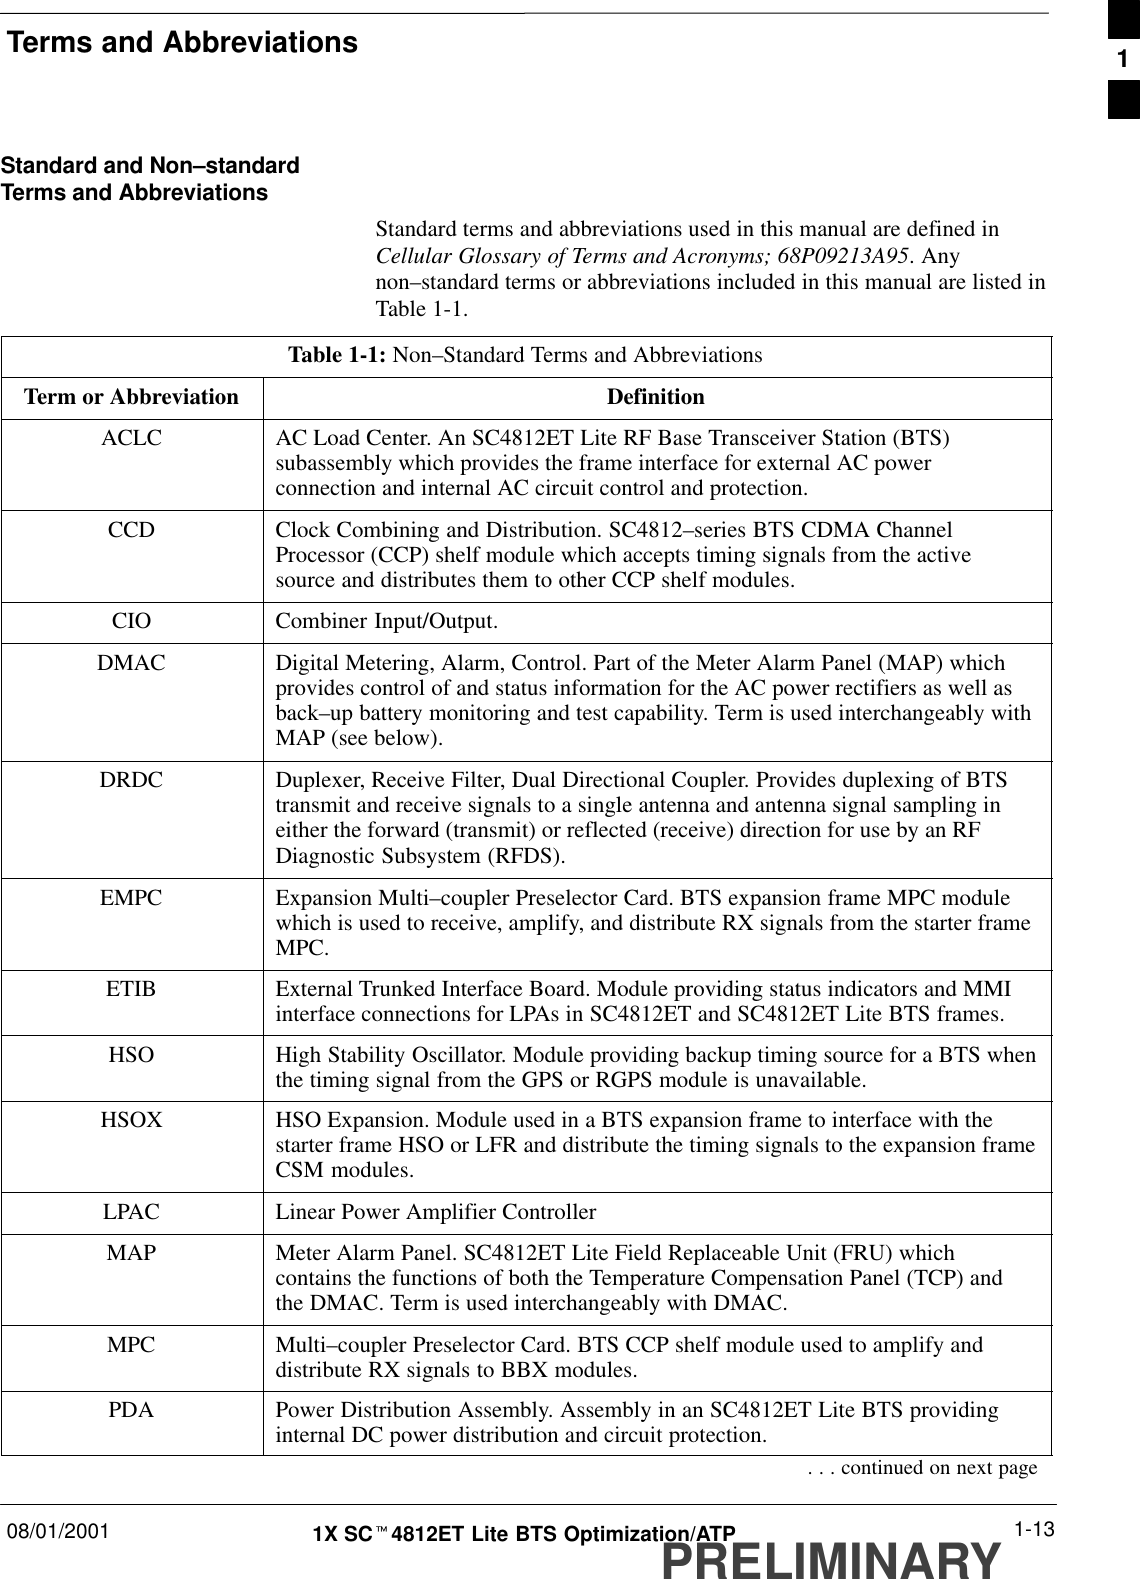 Terms and Abbreviations08/01/2001 1-131X SCt4812ET Lite BTS Optimization/ATPPRELIMINARYStandard and Non–standardTerms and AbbreviationsStandard terms and abbreviations used in this manual are defined inCellular Glossary of Terms and Acronyms; 68P09213A95. Anynon–standard terms or abbreviations included in this manual are listed inTable 1-1.Table 1-1: Non–Standard Terms and AbbreviationsTerm or Abbreviation DefinitionACLC AC Load Center. An SC4812ET Lite RF Base Transceiver Station (BTS)subassembly which provides the frame interface for external AC powerconnection and internal AC circuit control and protection.CCD Clock Combining and Distribution. SC4812–series BTS CDMA ChannelProcessor (CCP) shelf module which accepts timing signals from the activesource and distributes them to other CCP shelf modules.CIO Combiner Input/Output.DMAC Digital Metering, Alarm, Control. Part of the Meter Alarm Panel (MAP) whichprovides control of and status information for the AC power rectifiers as well asback–up battery monitoring and test capability. Term is used interchangeably withMAP (see below).DRDC Duplexer, Receive Filter, Dual Directional Coupler. Provides duplexing of BTStransmit and receive signals to a single antenna and antenna signal sampling ineither the forward (transmit) or reflected (receive) direction for use by an RFDiagnostic Subsystem (RFDS).EMPC Expansion Multi–coupler Preselector Card. BTS expansion frame MPC modulewhich is used to receive, amplify, and distribute RX signals from the starter frameMPC.ETIB External Trunked Interface Board. Module providing status indicators and MMIinterface connections for LPAs in SC4812ET and SC4812ET Lite BTS frames.HSO High Stability Oscillator. Module providing backup timing source for a BTS whenthe timing signal from the GPS or RGPS module is unavailable.HSOX HSO Expansion. Module used in a BTS expansion frame to interface with thestarter frame HSO or LFR and distribute the timing signals to the expansion frameCSM modules.LPAC Linear Power Amplifier ControllerMAP Meter Alarm Panel. SC4812ET Lite Field Replaceable Unit (FRU) whichcontains the functions of both the Temperature Compensation Panel (TCP) andthe DMAC. Term is used interchangeably with DMAC.MPC Multi–coupler Preselector Card. BTS CCP shelf module used to amplify anddistribute RX signals to BBX modules.PDA Power Distribution Assembly. Assembly in an SC4812ET Lite BTS providinginternal DC power distribution and circuit protection.. . . continued on next page1